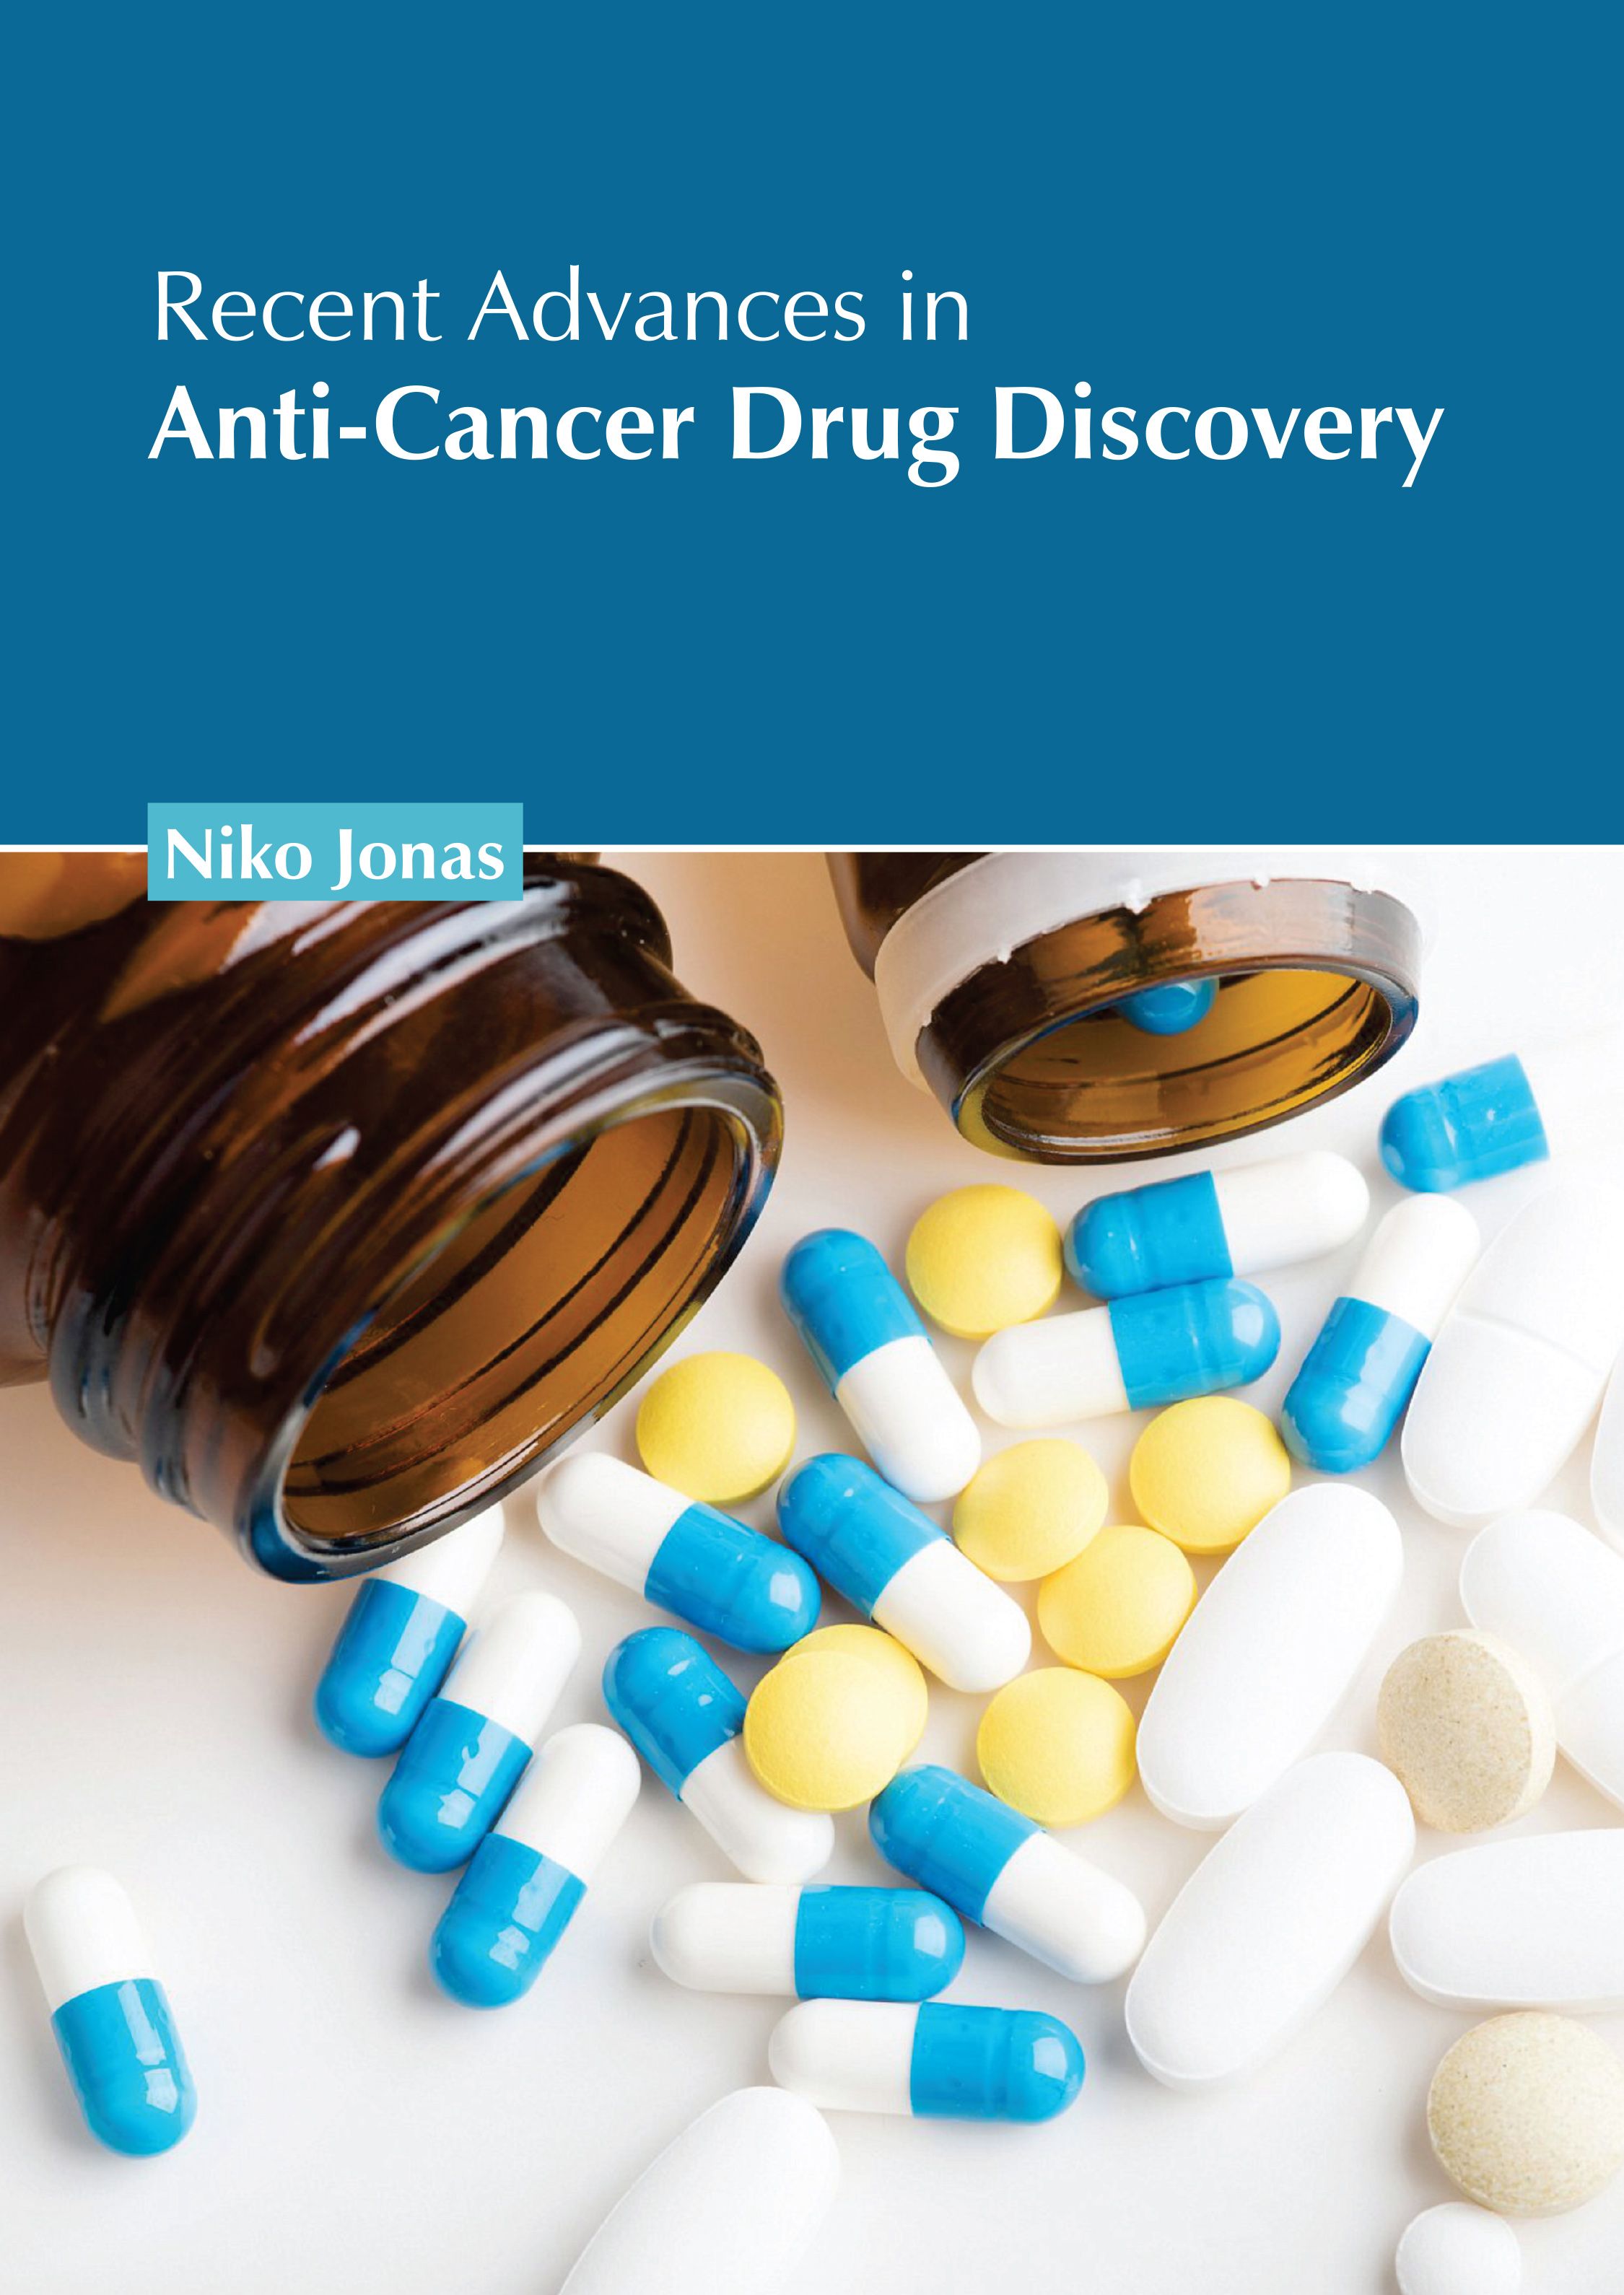 RECENT ADVANCES IN ANTI-CANCER DRUG DISCOVERY